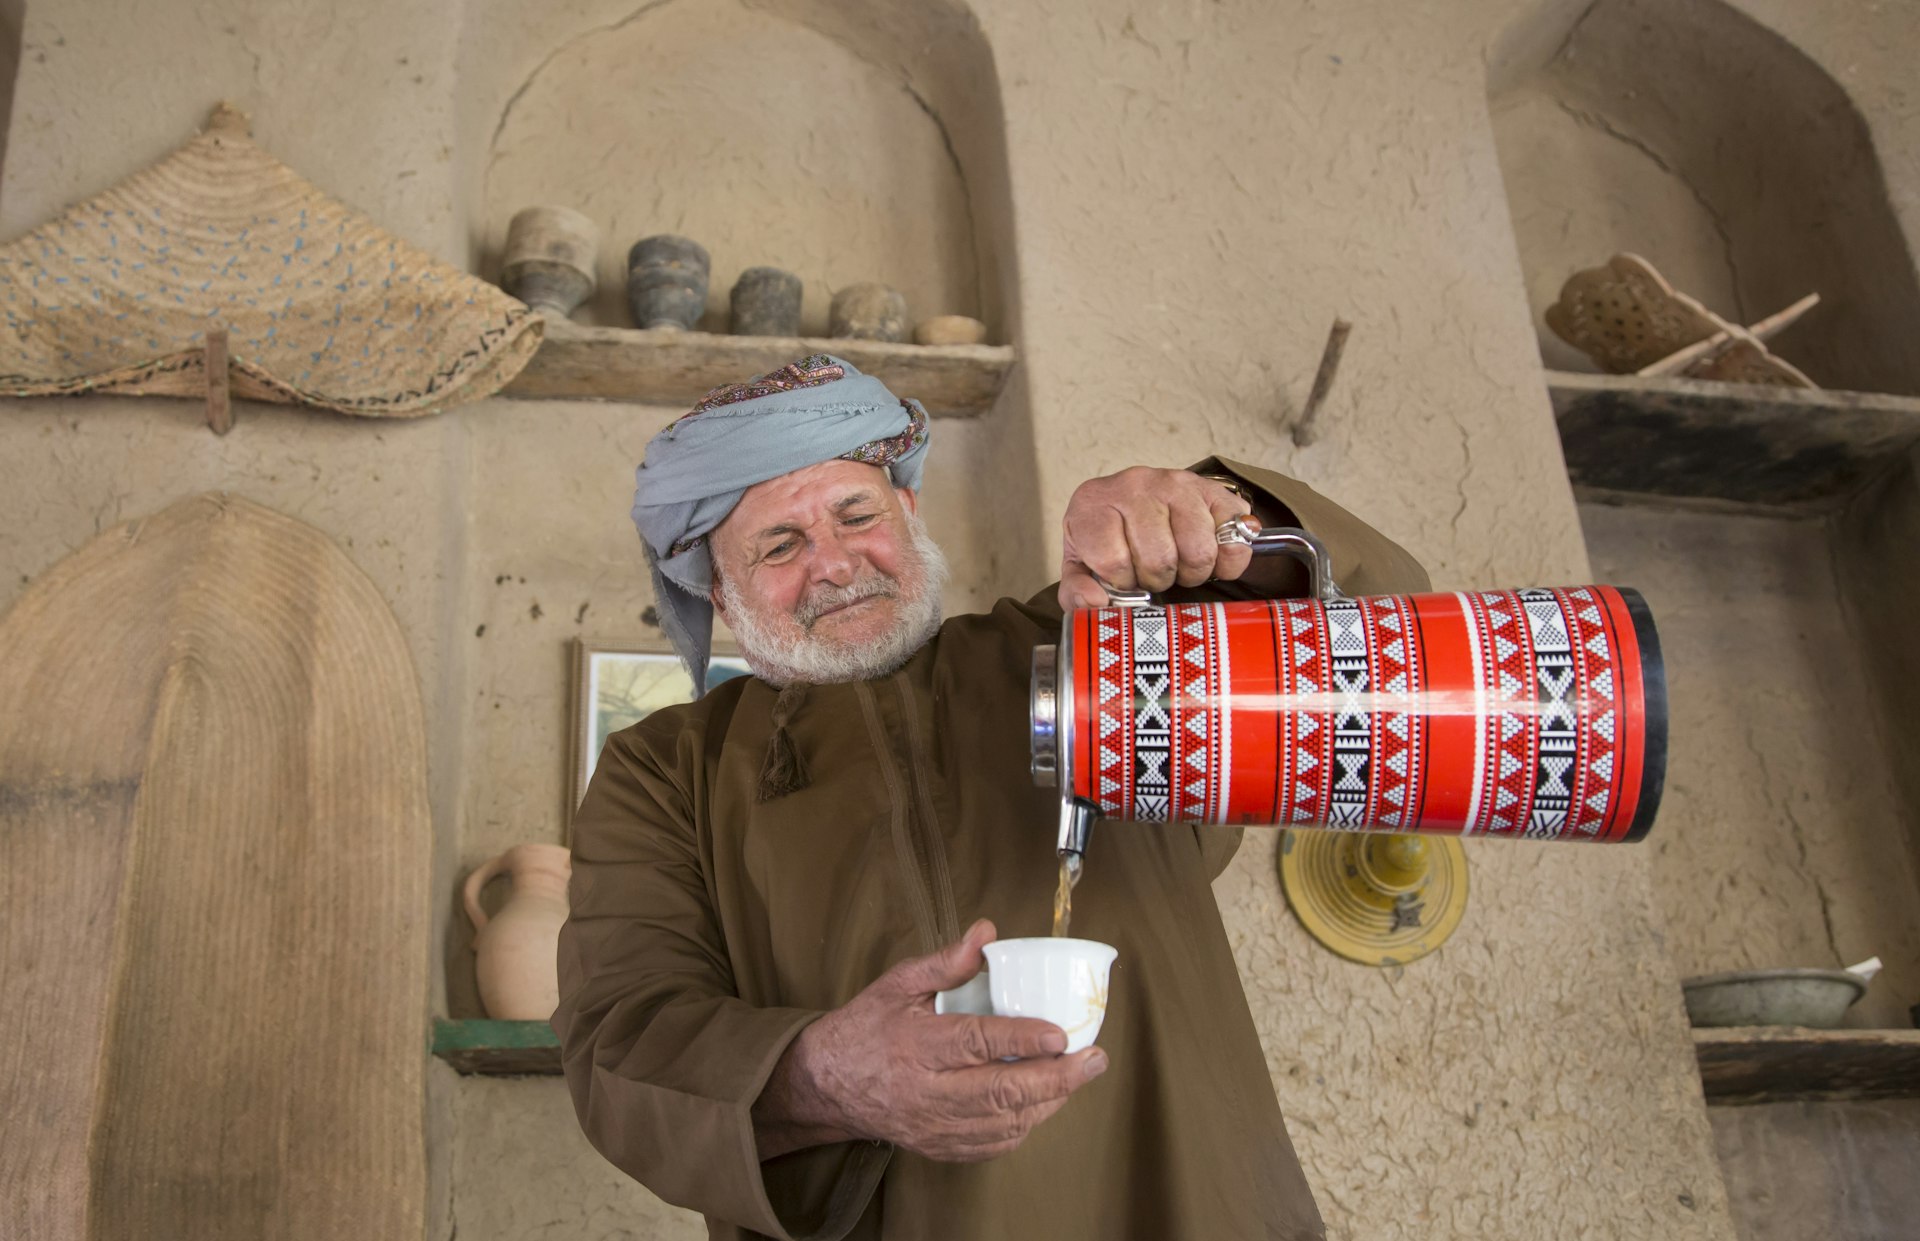 A man serves qahwa, traditional coffee, from a thermos, Oman, Middle East